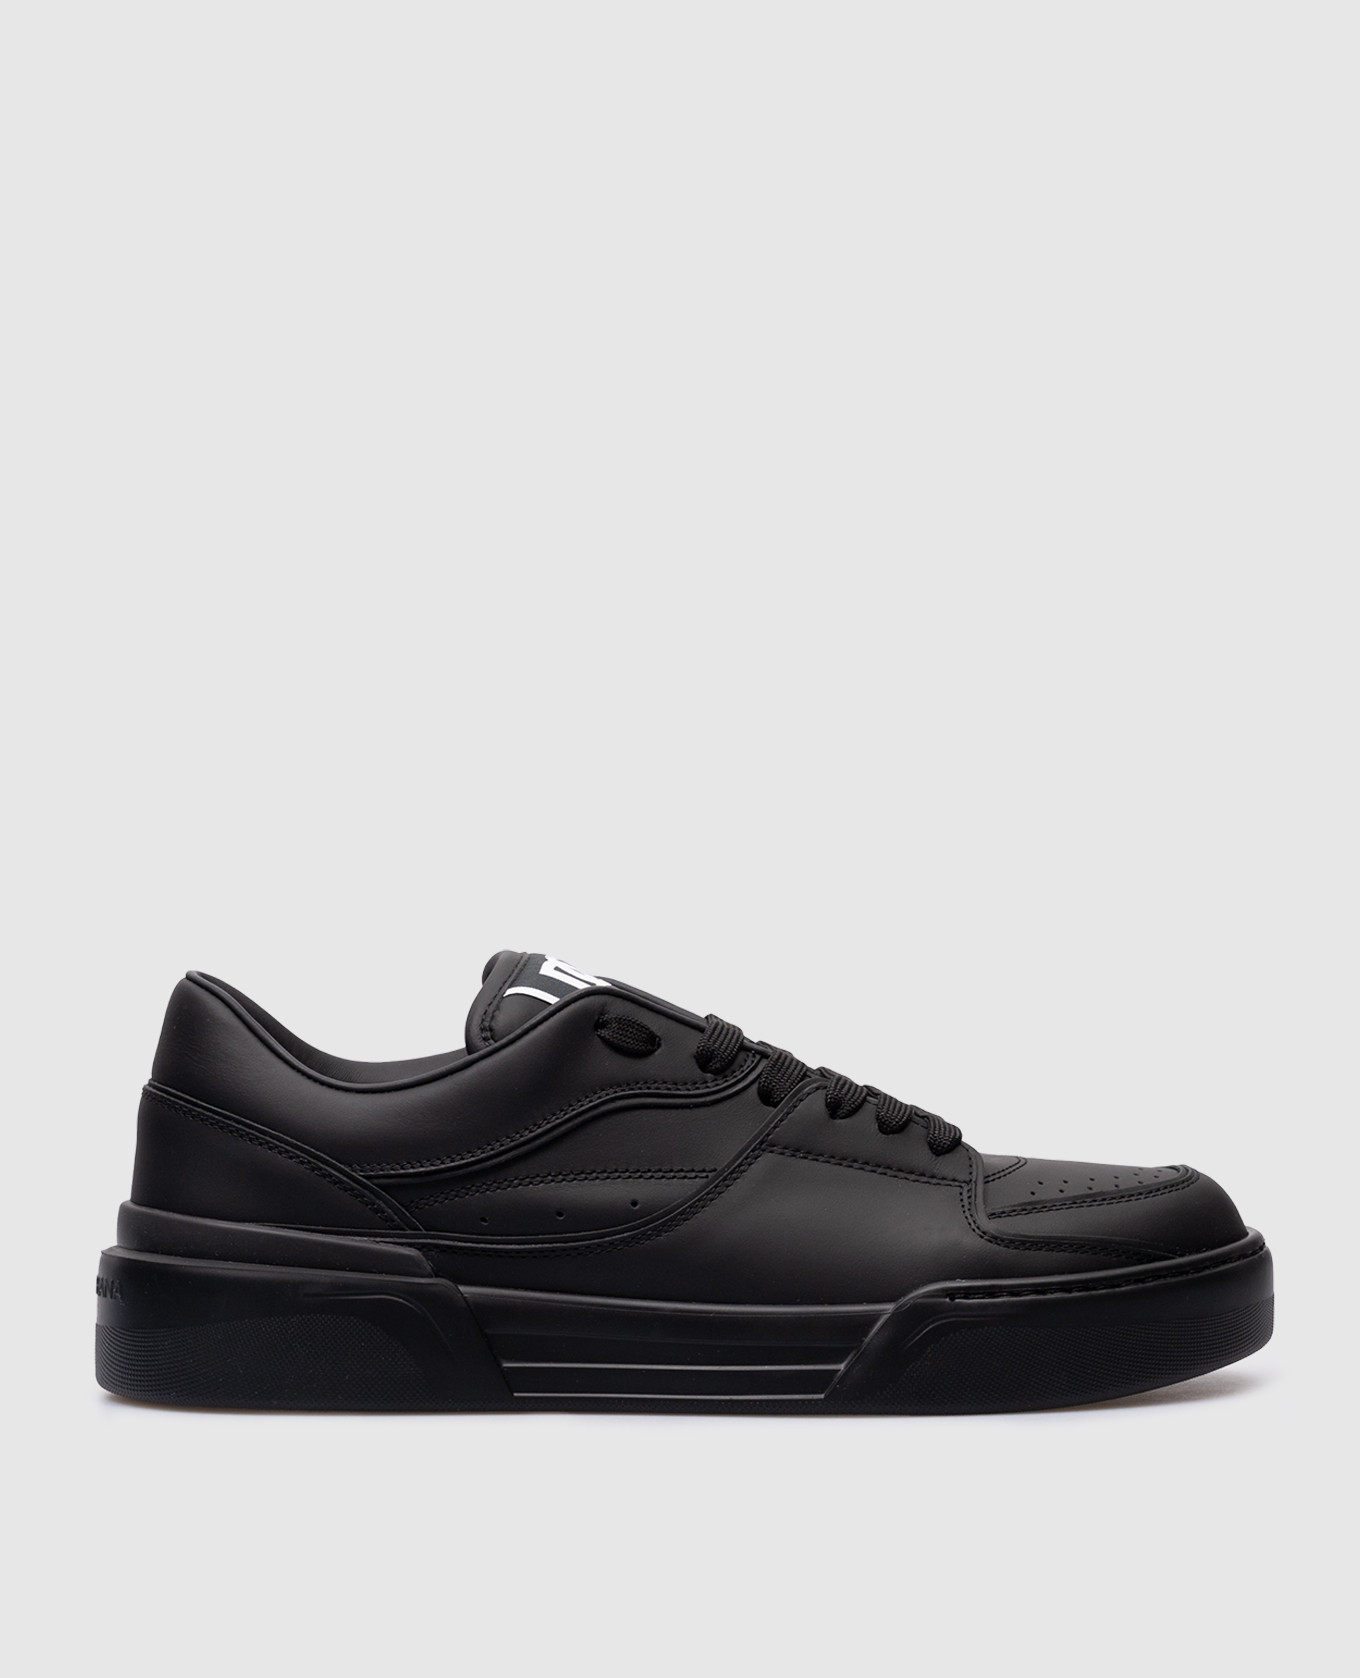 Black leather sneakers from New Roma with a logo patch